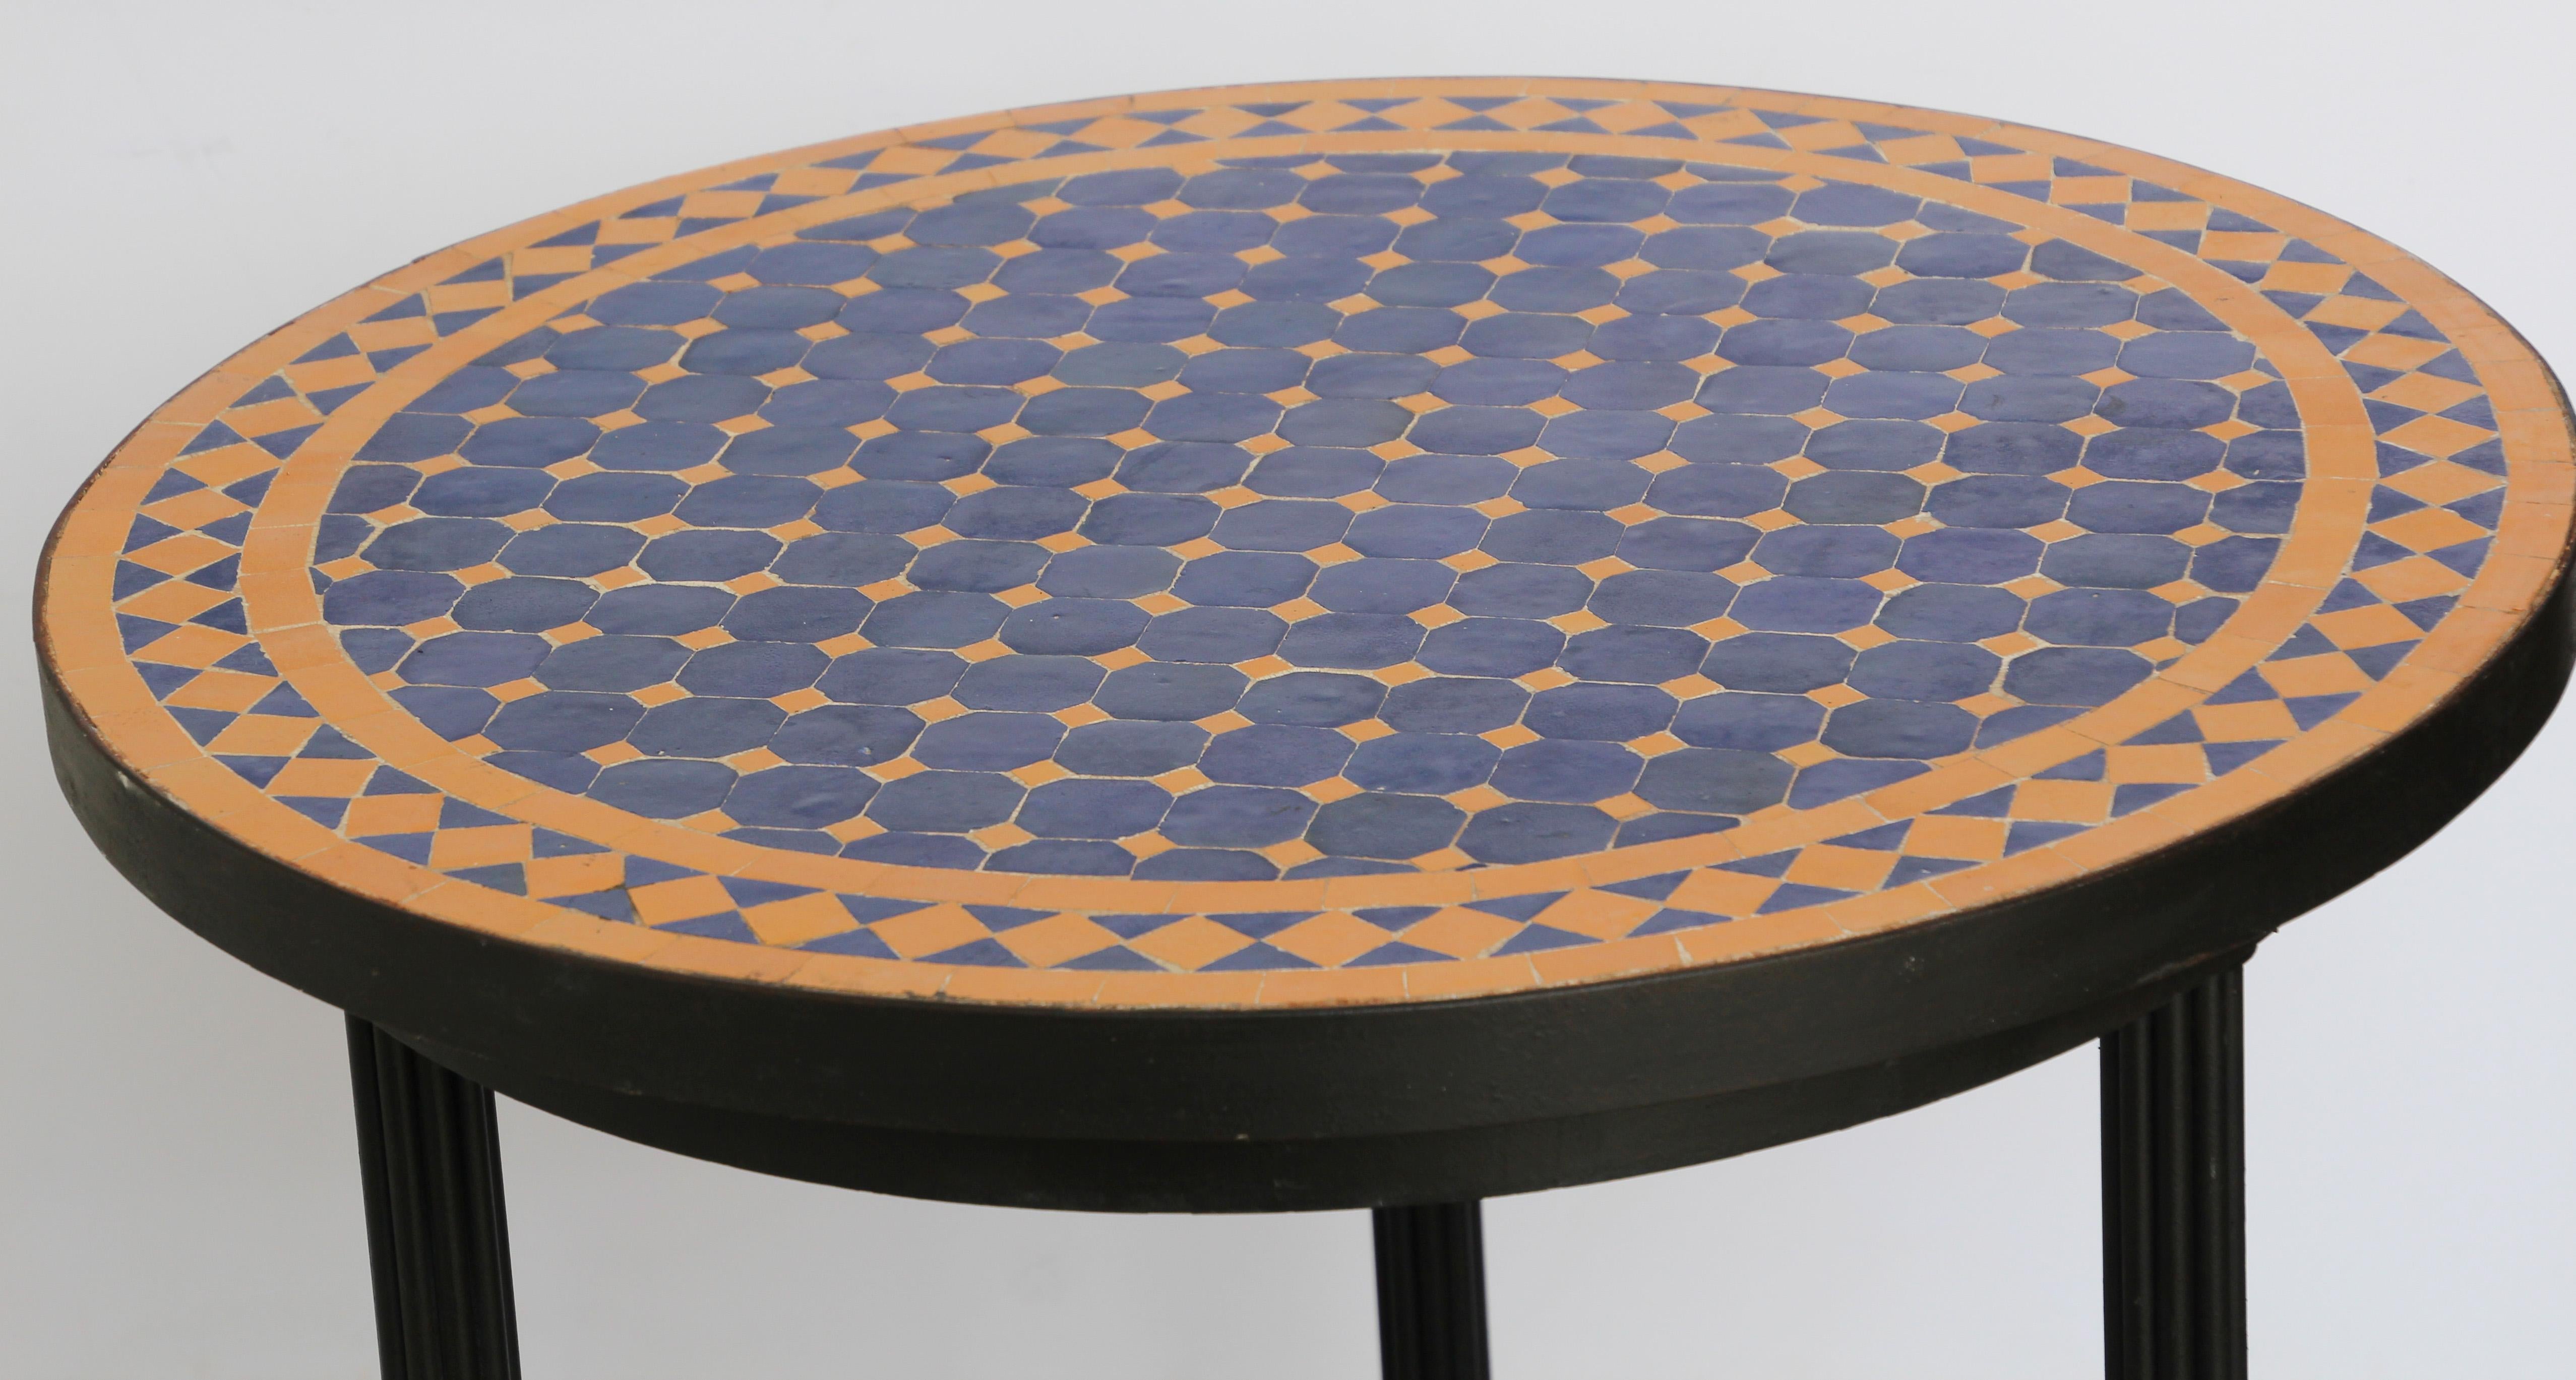 Moorish Moroccan Mosaic Tiles Cobalt Blue and Yellow Colors Side Table